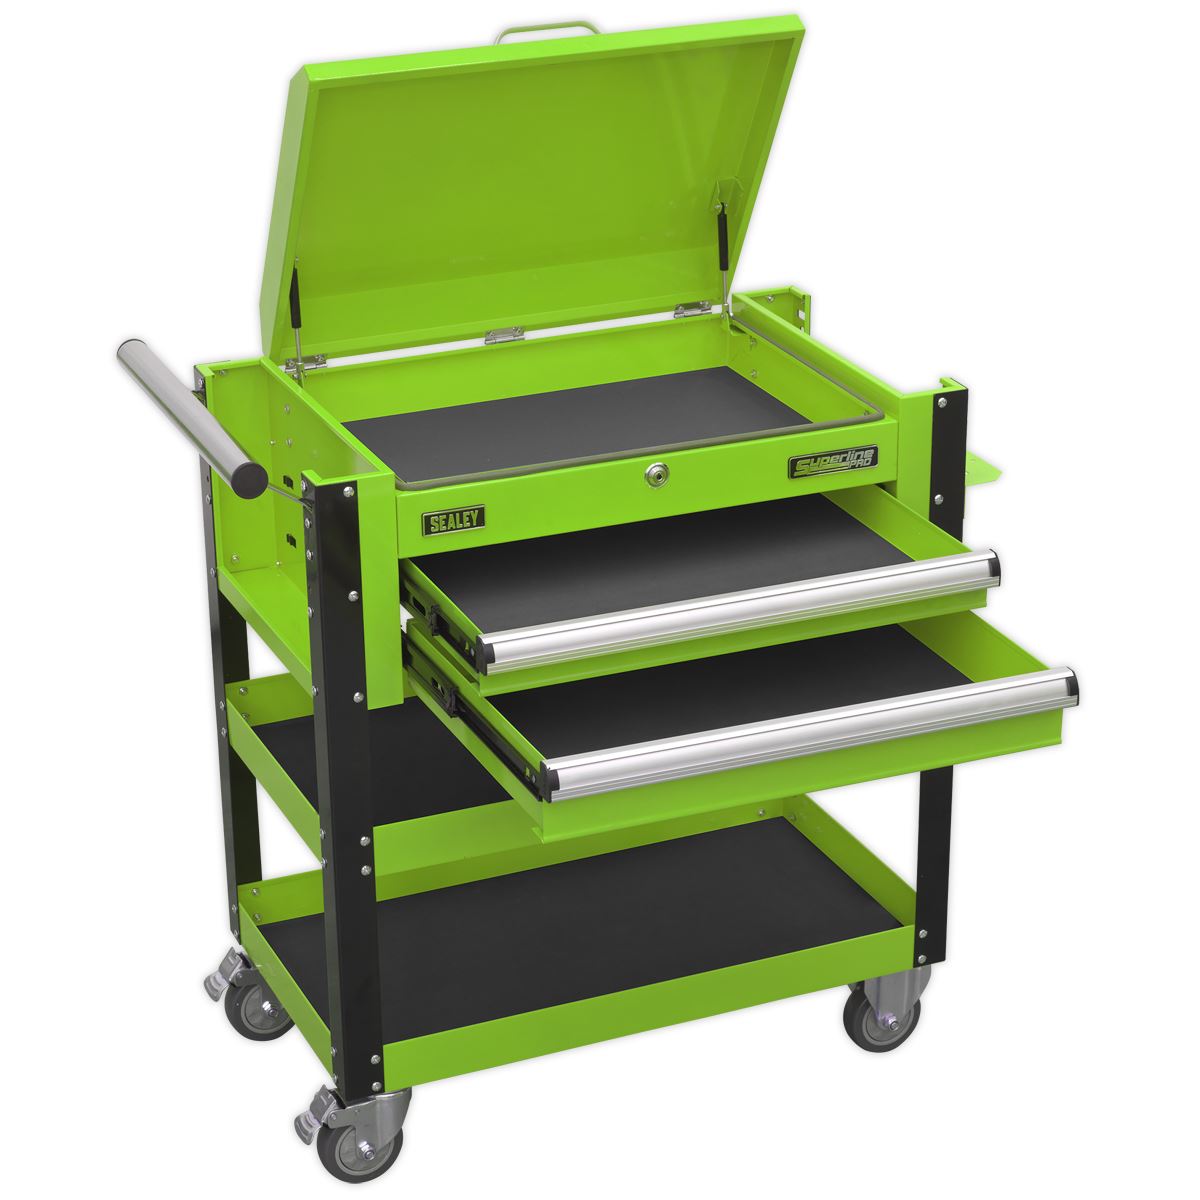 Sealey Superline Pro Heavy-Duty Mobile Tool & Parts Trolley 2 Drawers & Lockable Top - Green